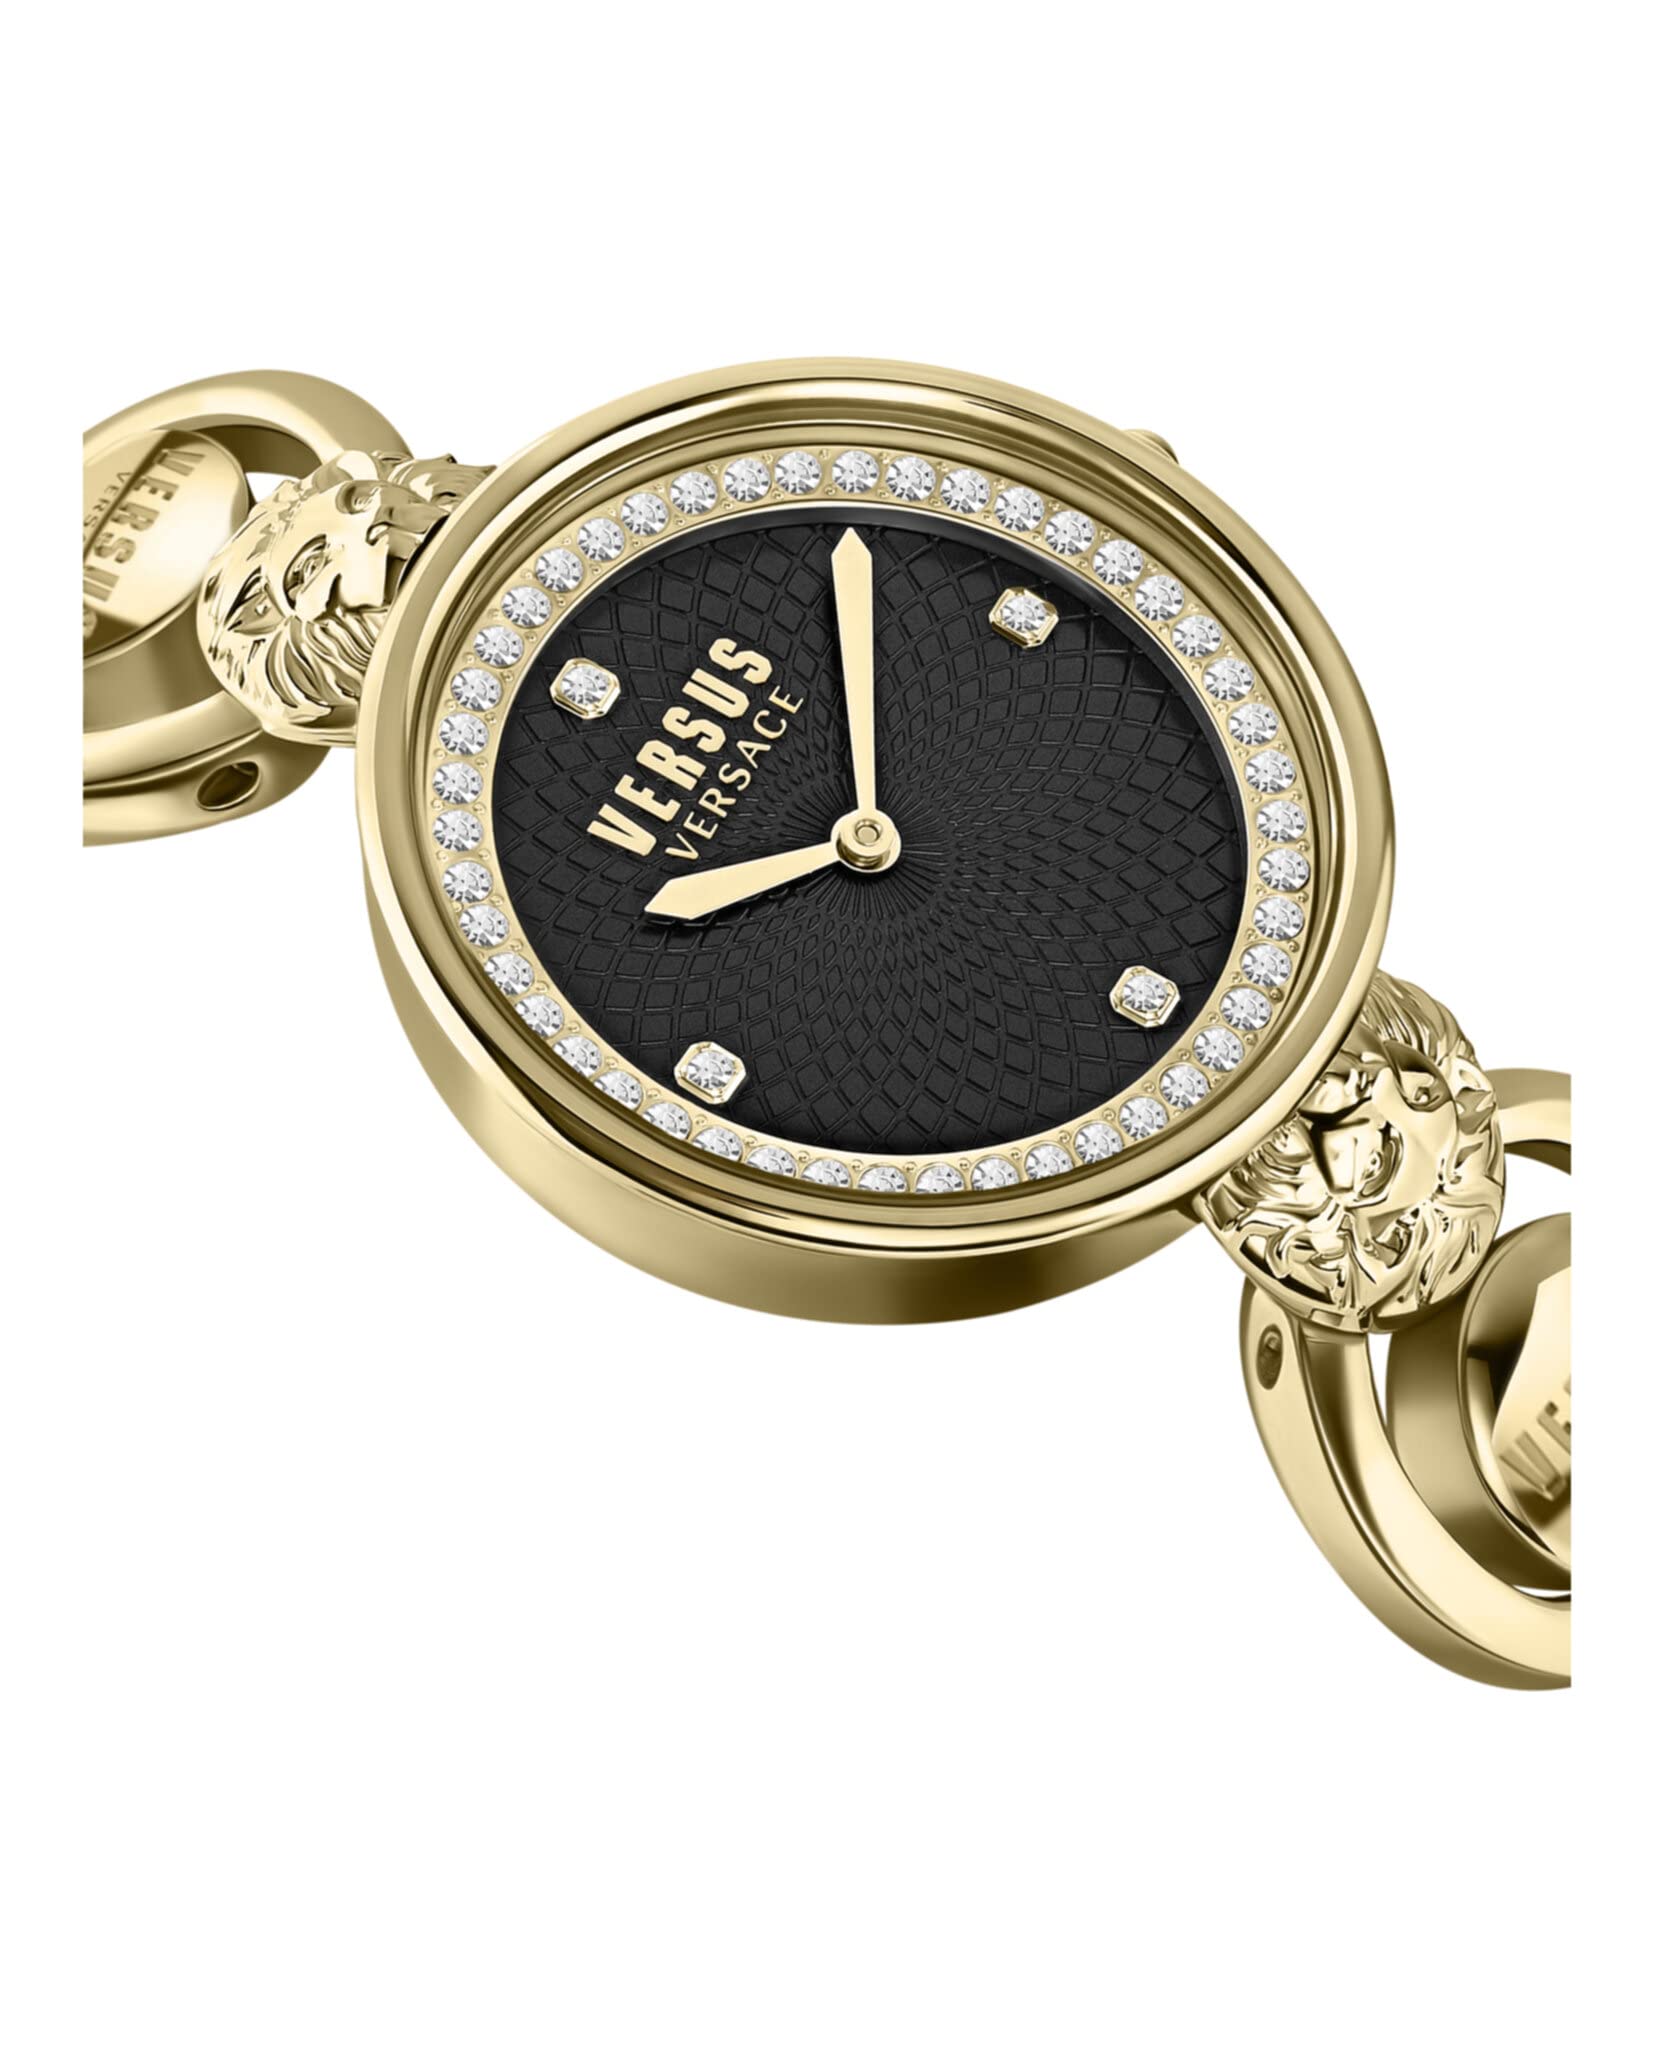 Versus Versace Victoria Harbour Collection Women's Watch Jewelry Featuring Silver Guilloché Dial Swarovski Crystals